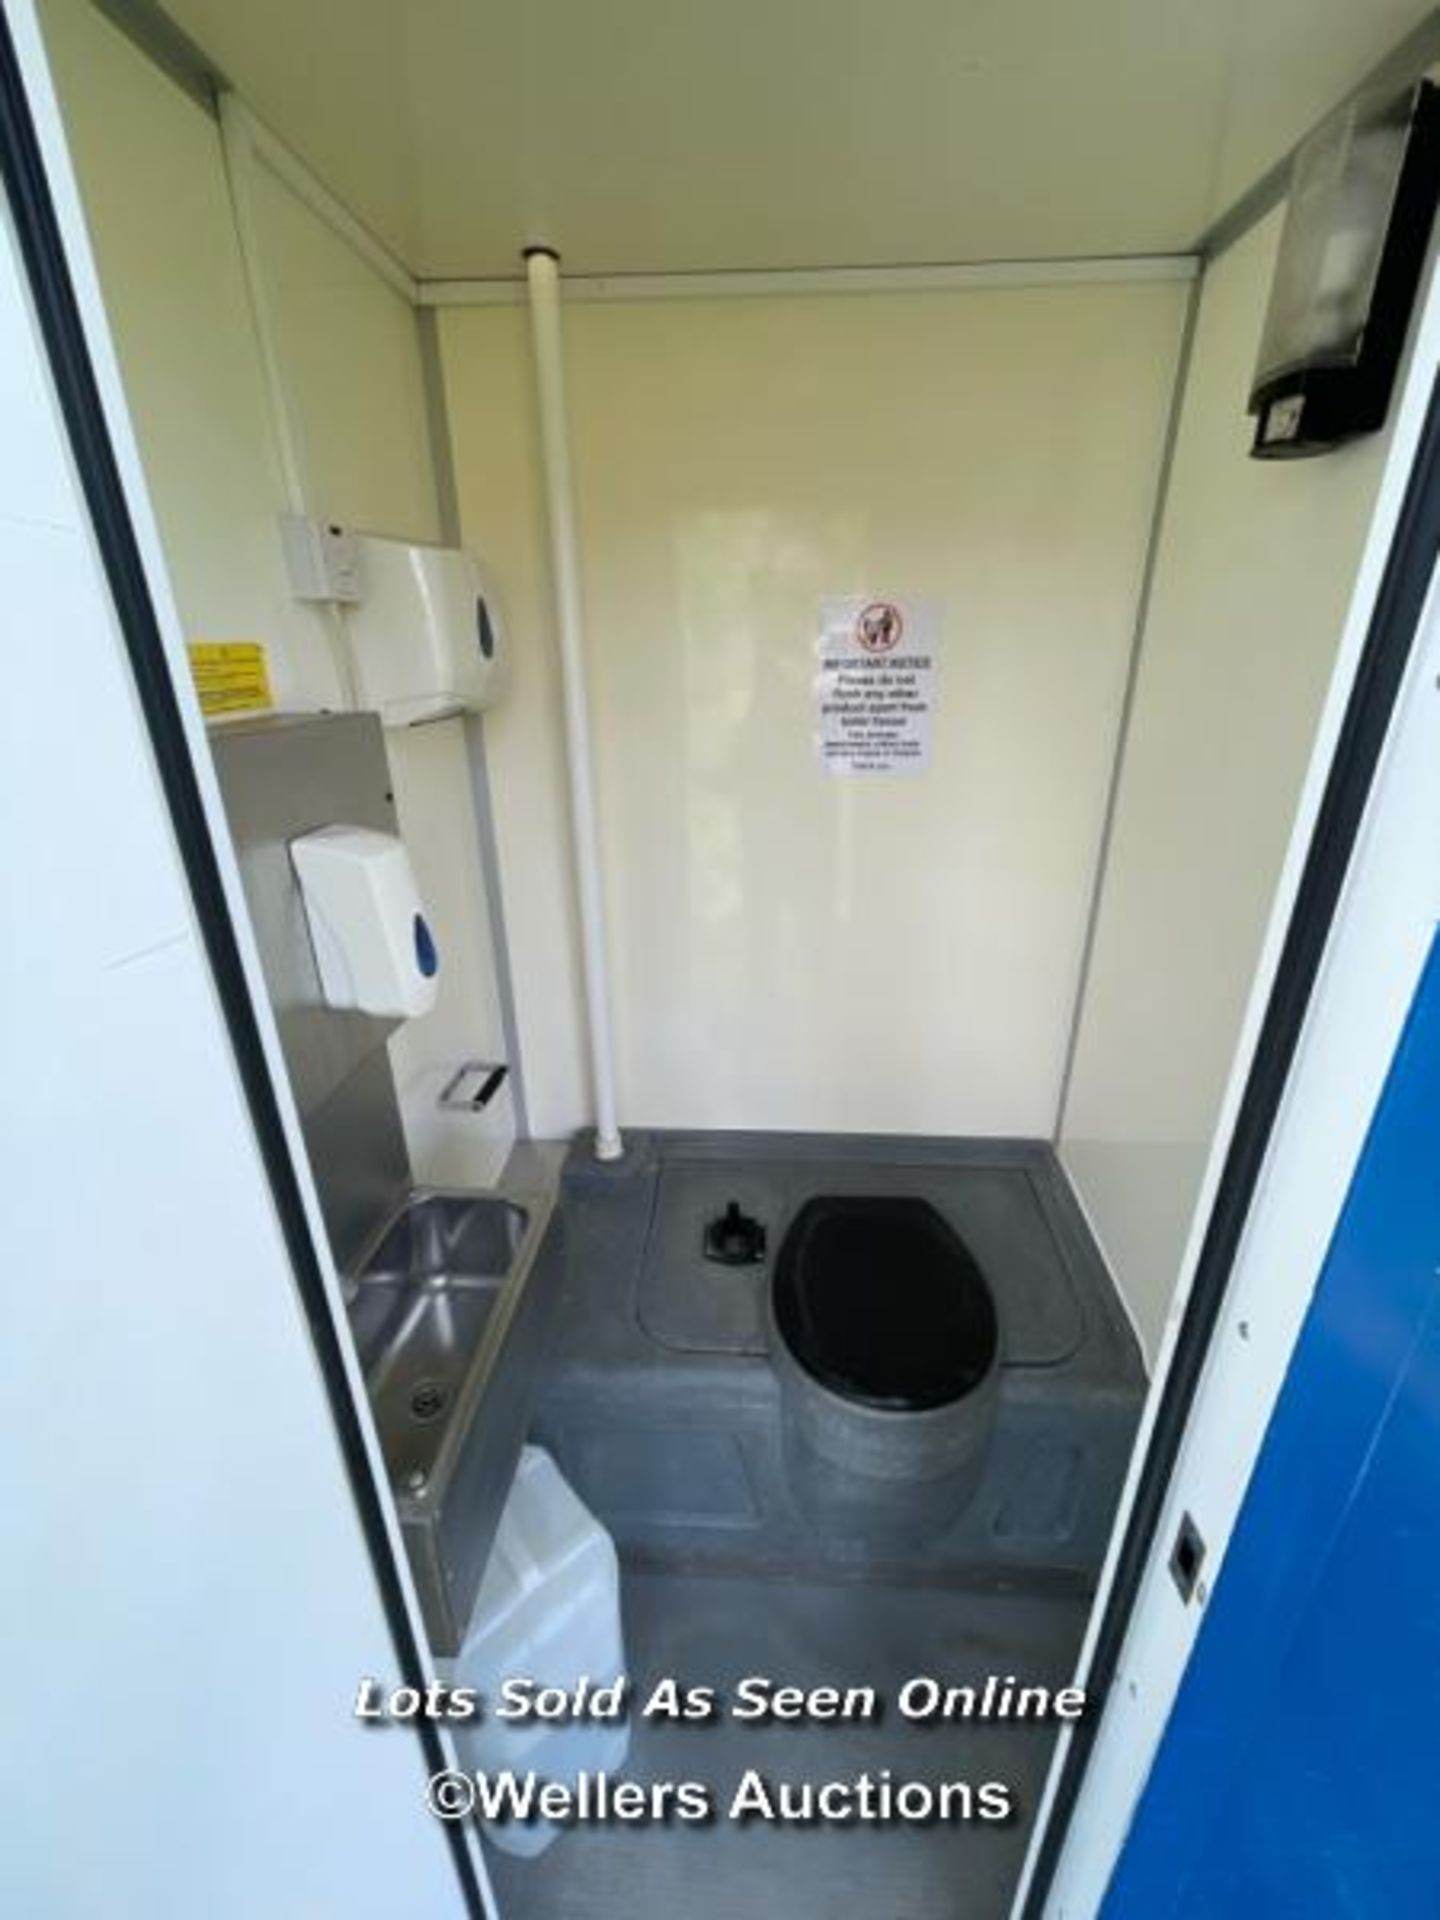 6 PERSON 12 X 7.5FT AJC EASY CABIN TOWABLE WELFARE UNIT, INCLUDES WASH BASIN, KETTLE, MICROWAVE, - Image 15 of 21